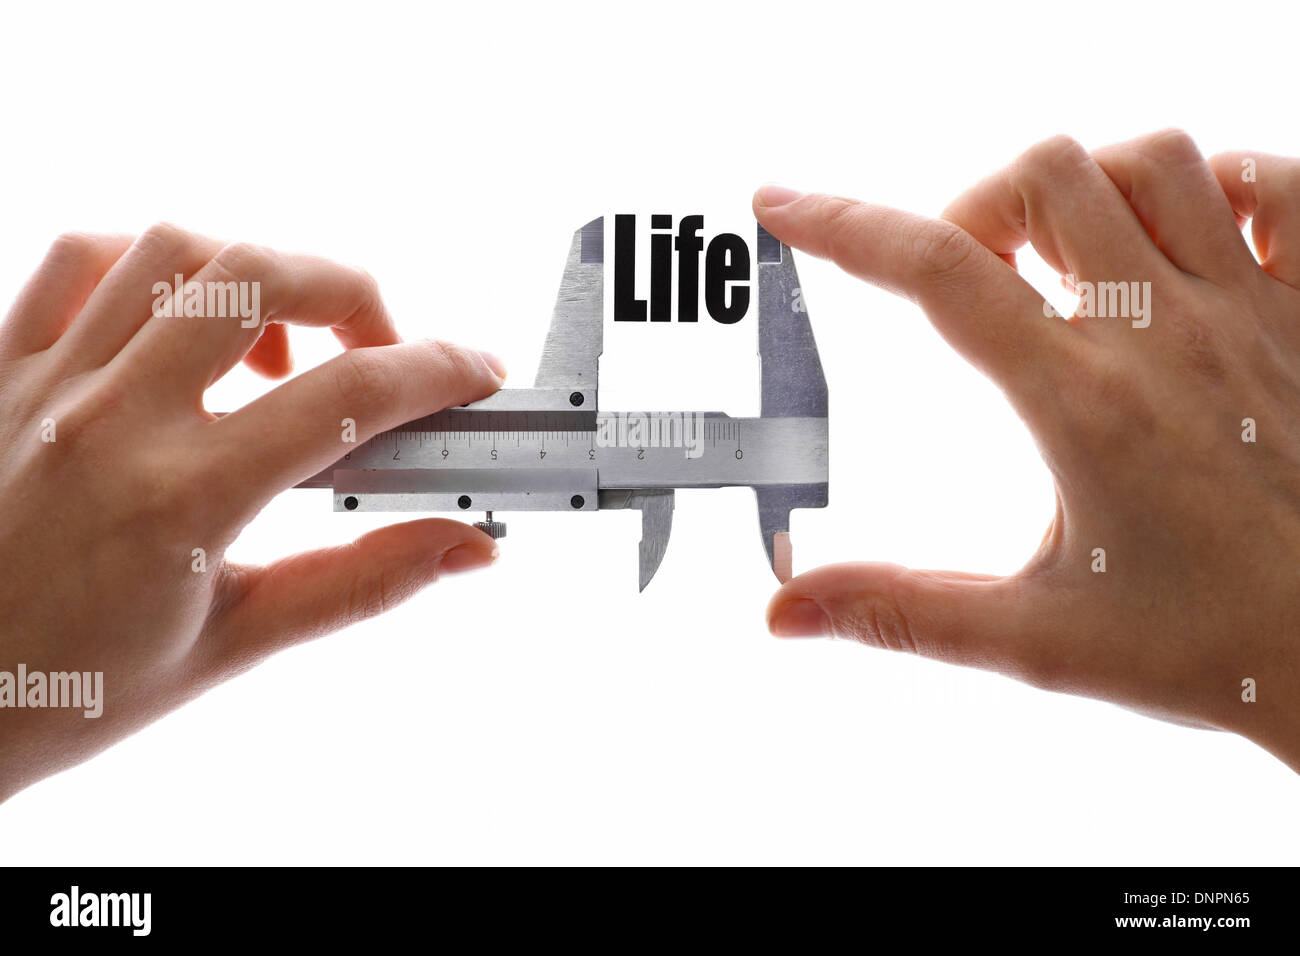 Two hands holding a caliper, measuring the word 'Life'. Stock Photo